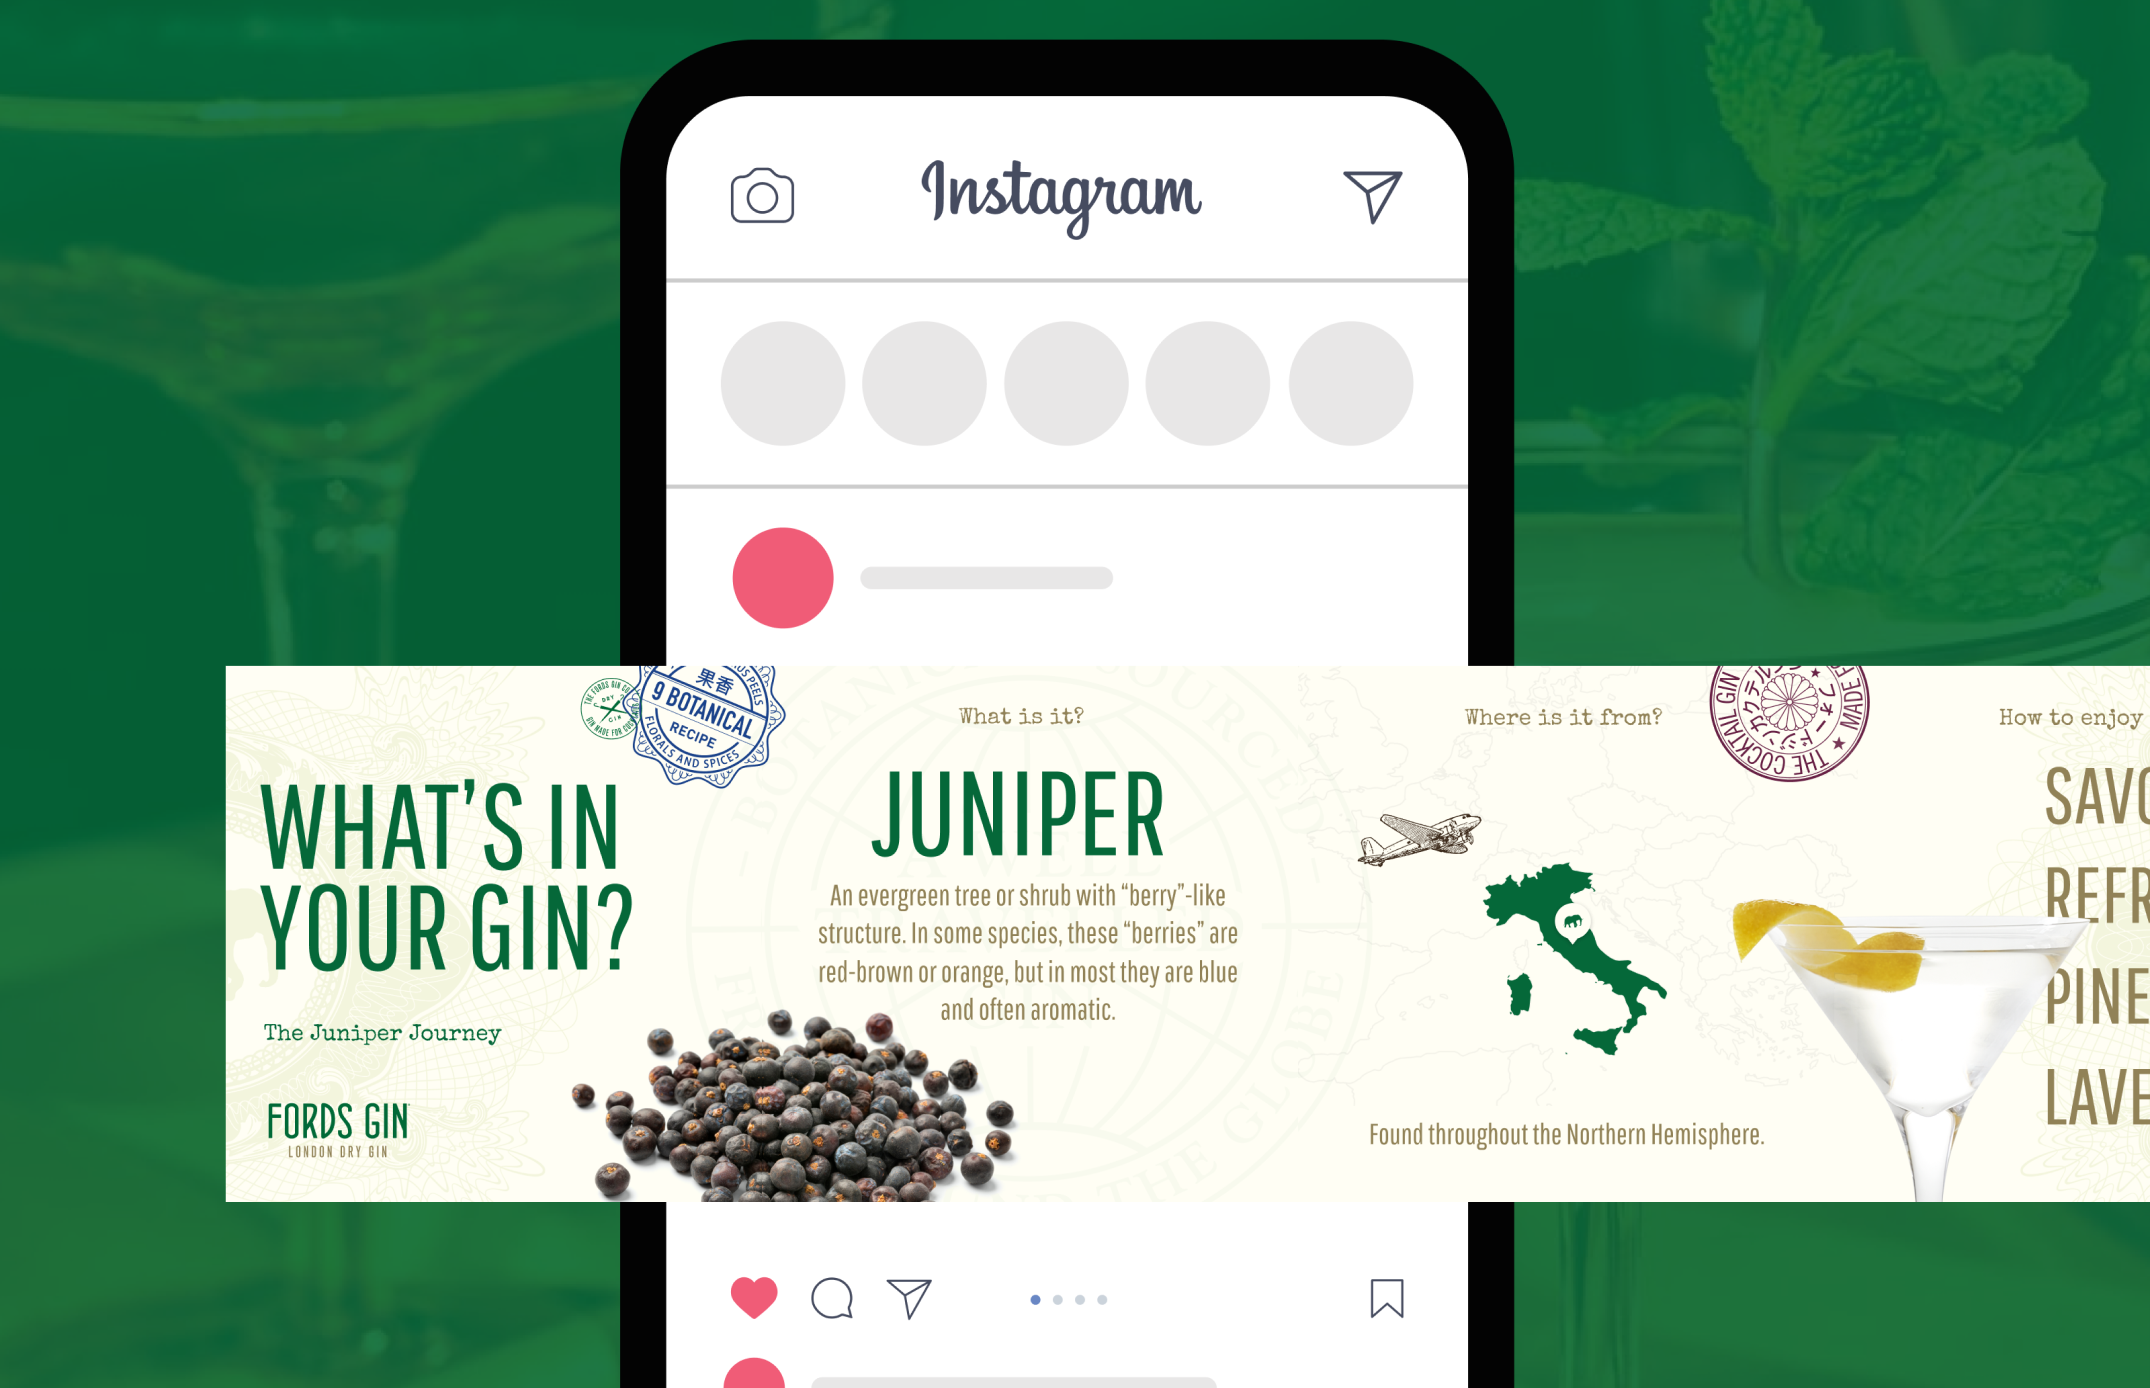 Fords Gin social media campaign "What is in your gin?"